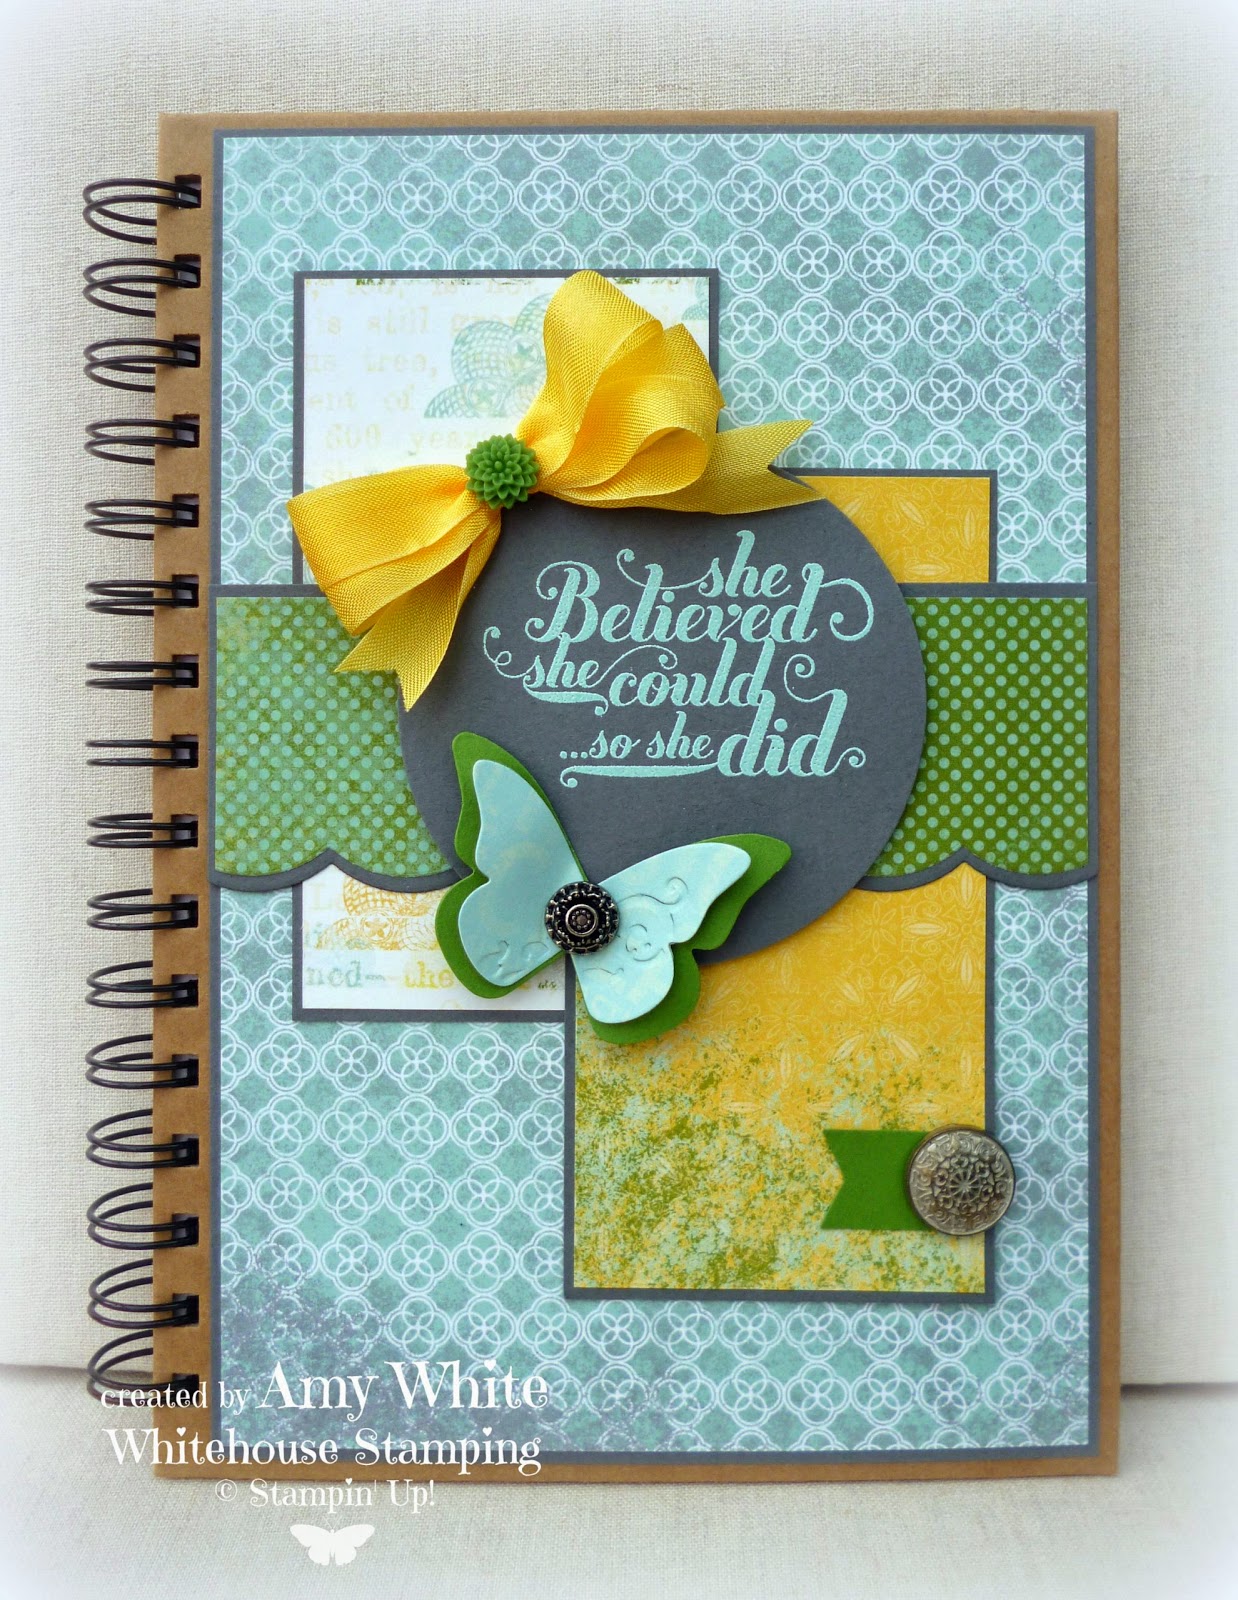 White House Stamping: Butterfly Believe Journal